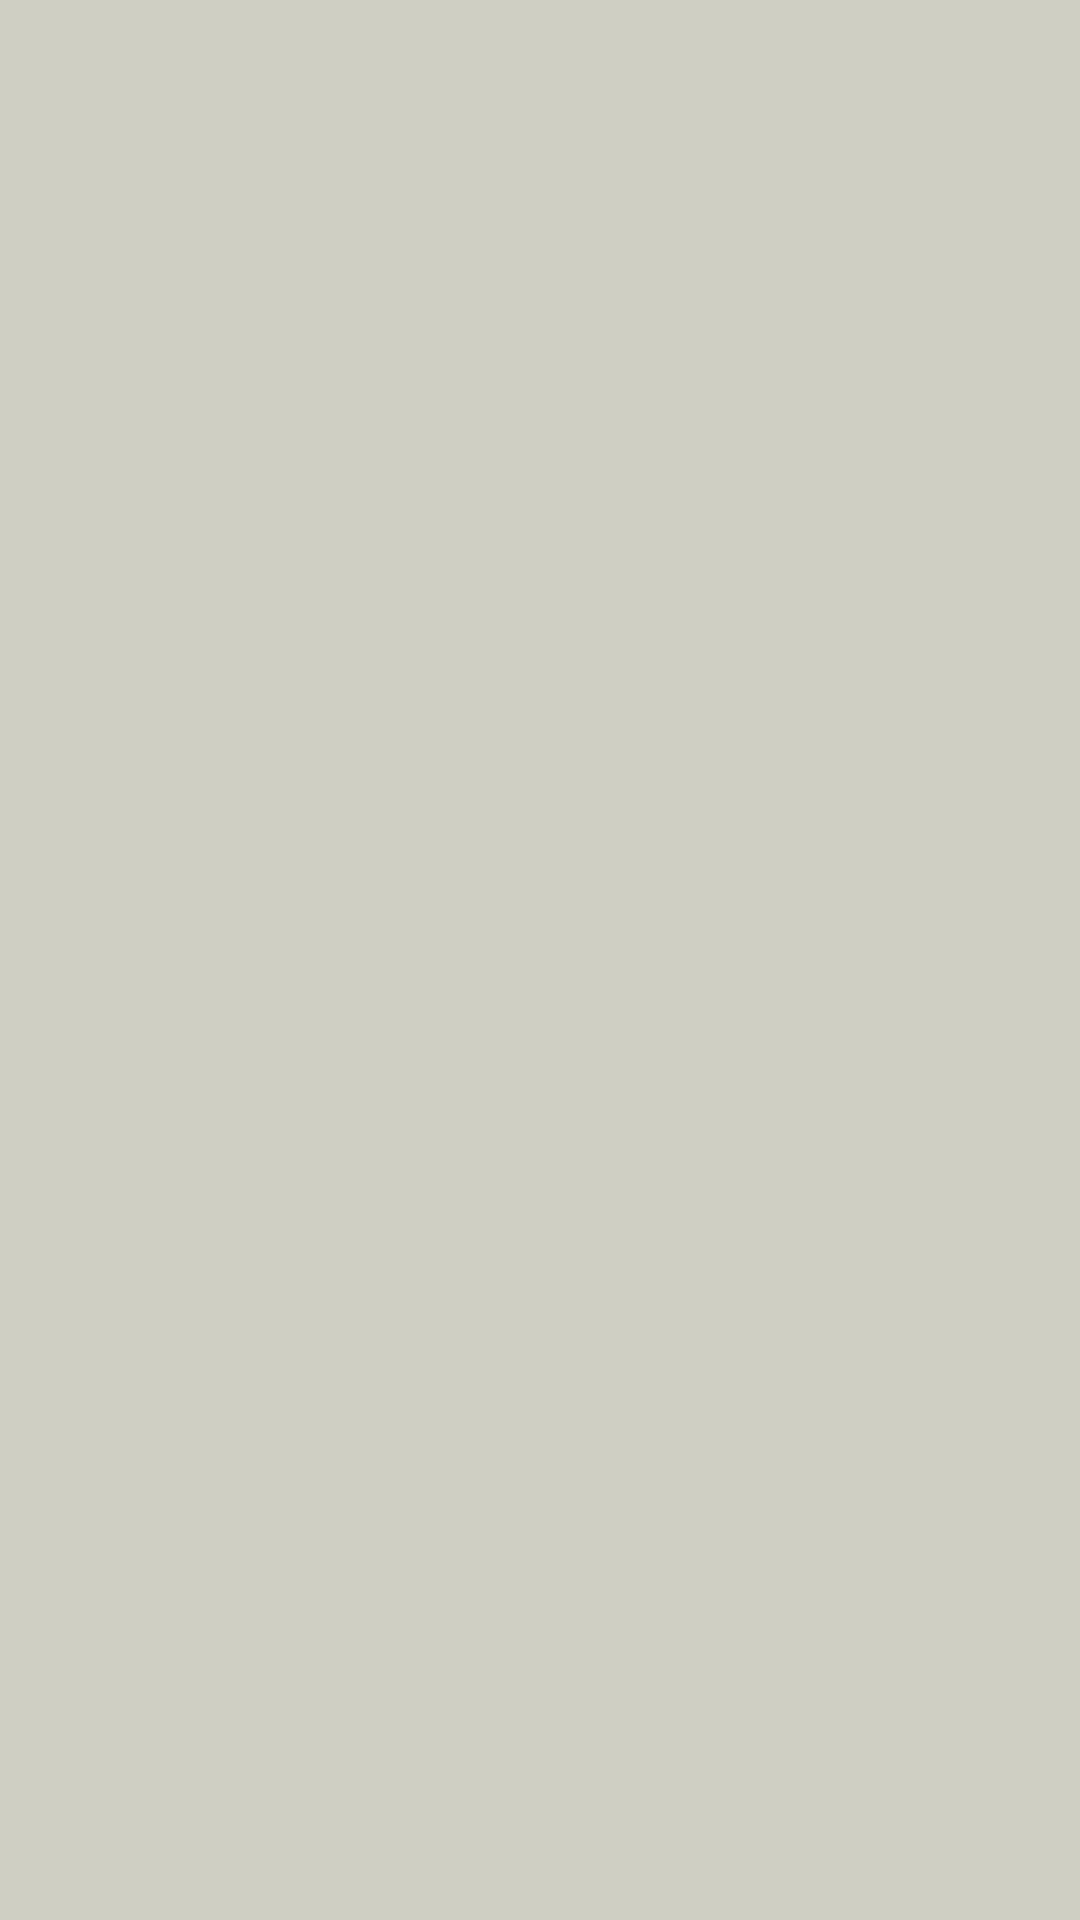 1080x1920 Pastel Gray Solid Color Background